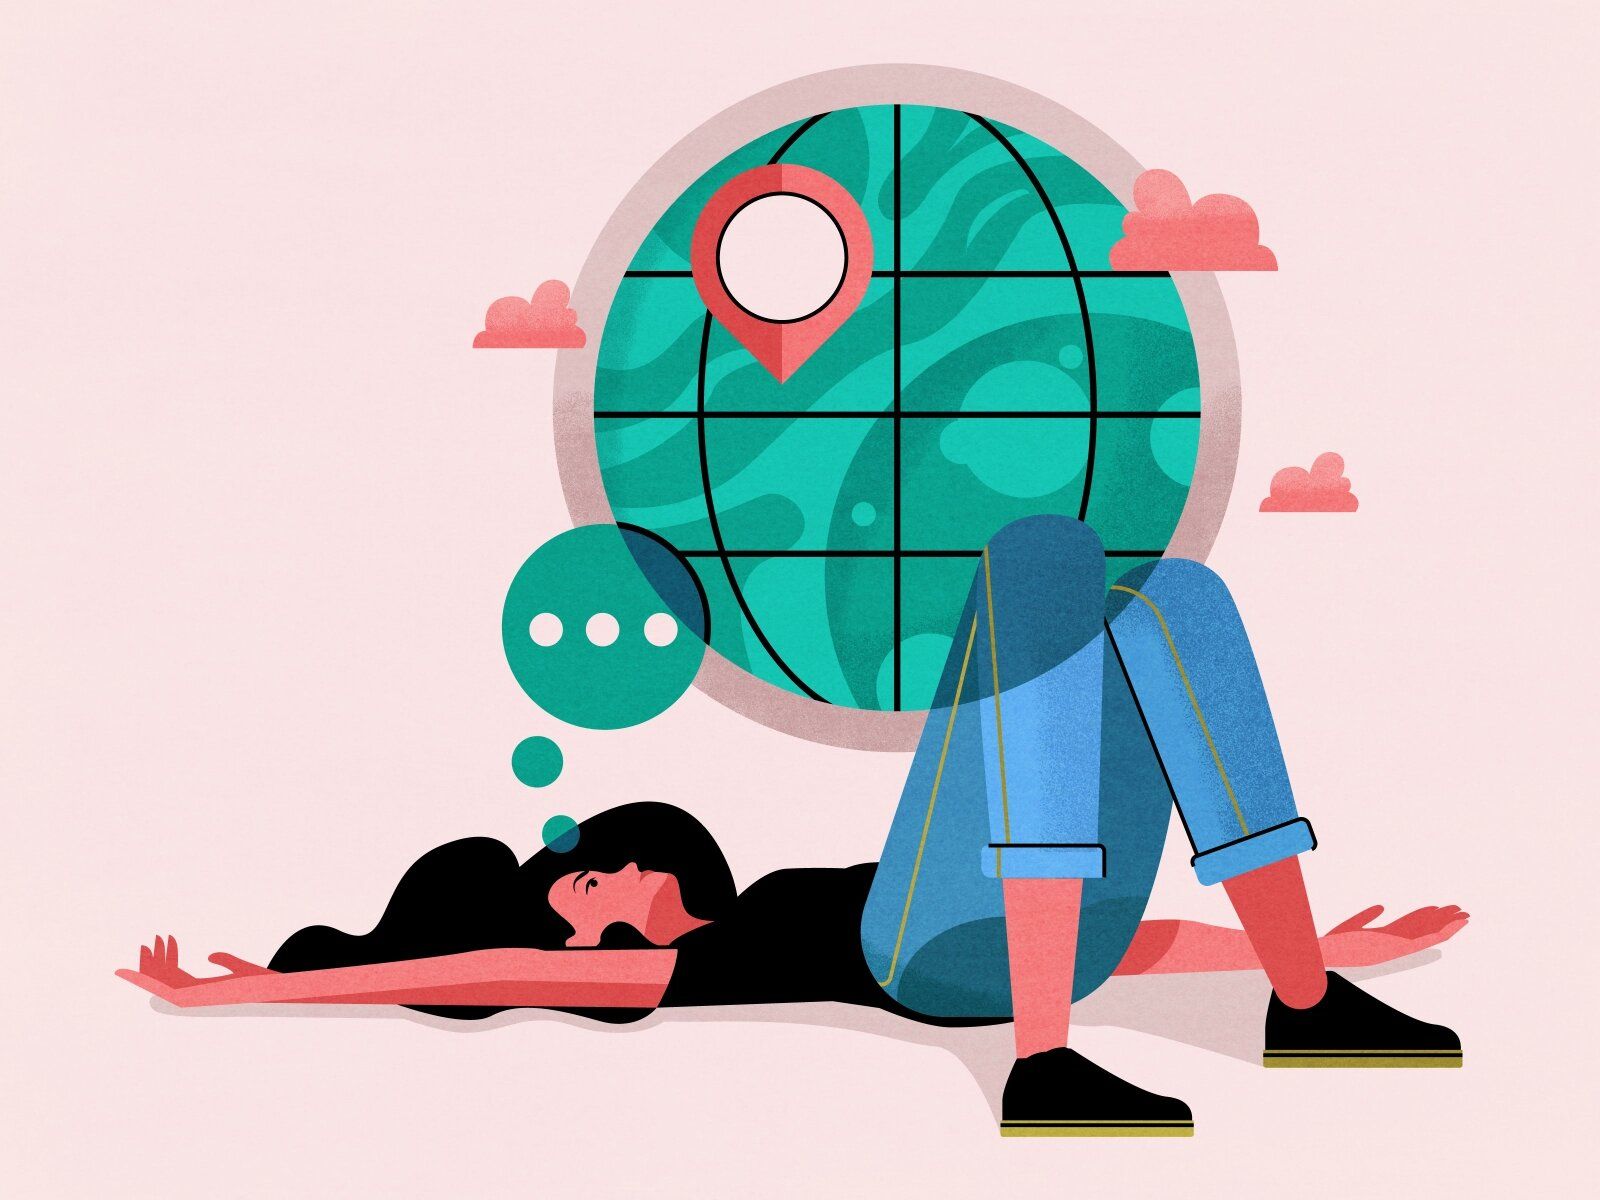 You have the power to rid your employees of feeling isolated by implementing appropriate social management events and techniques (*image by [Jonathan Holt](https://dribbble.com/Jonathan_Holt){ rel="nofollow" target="_blank" .default-md}*)